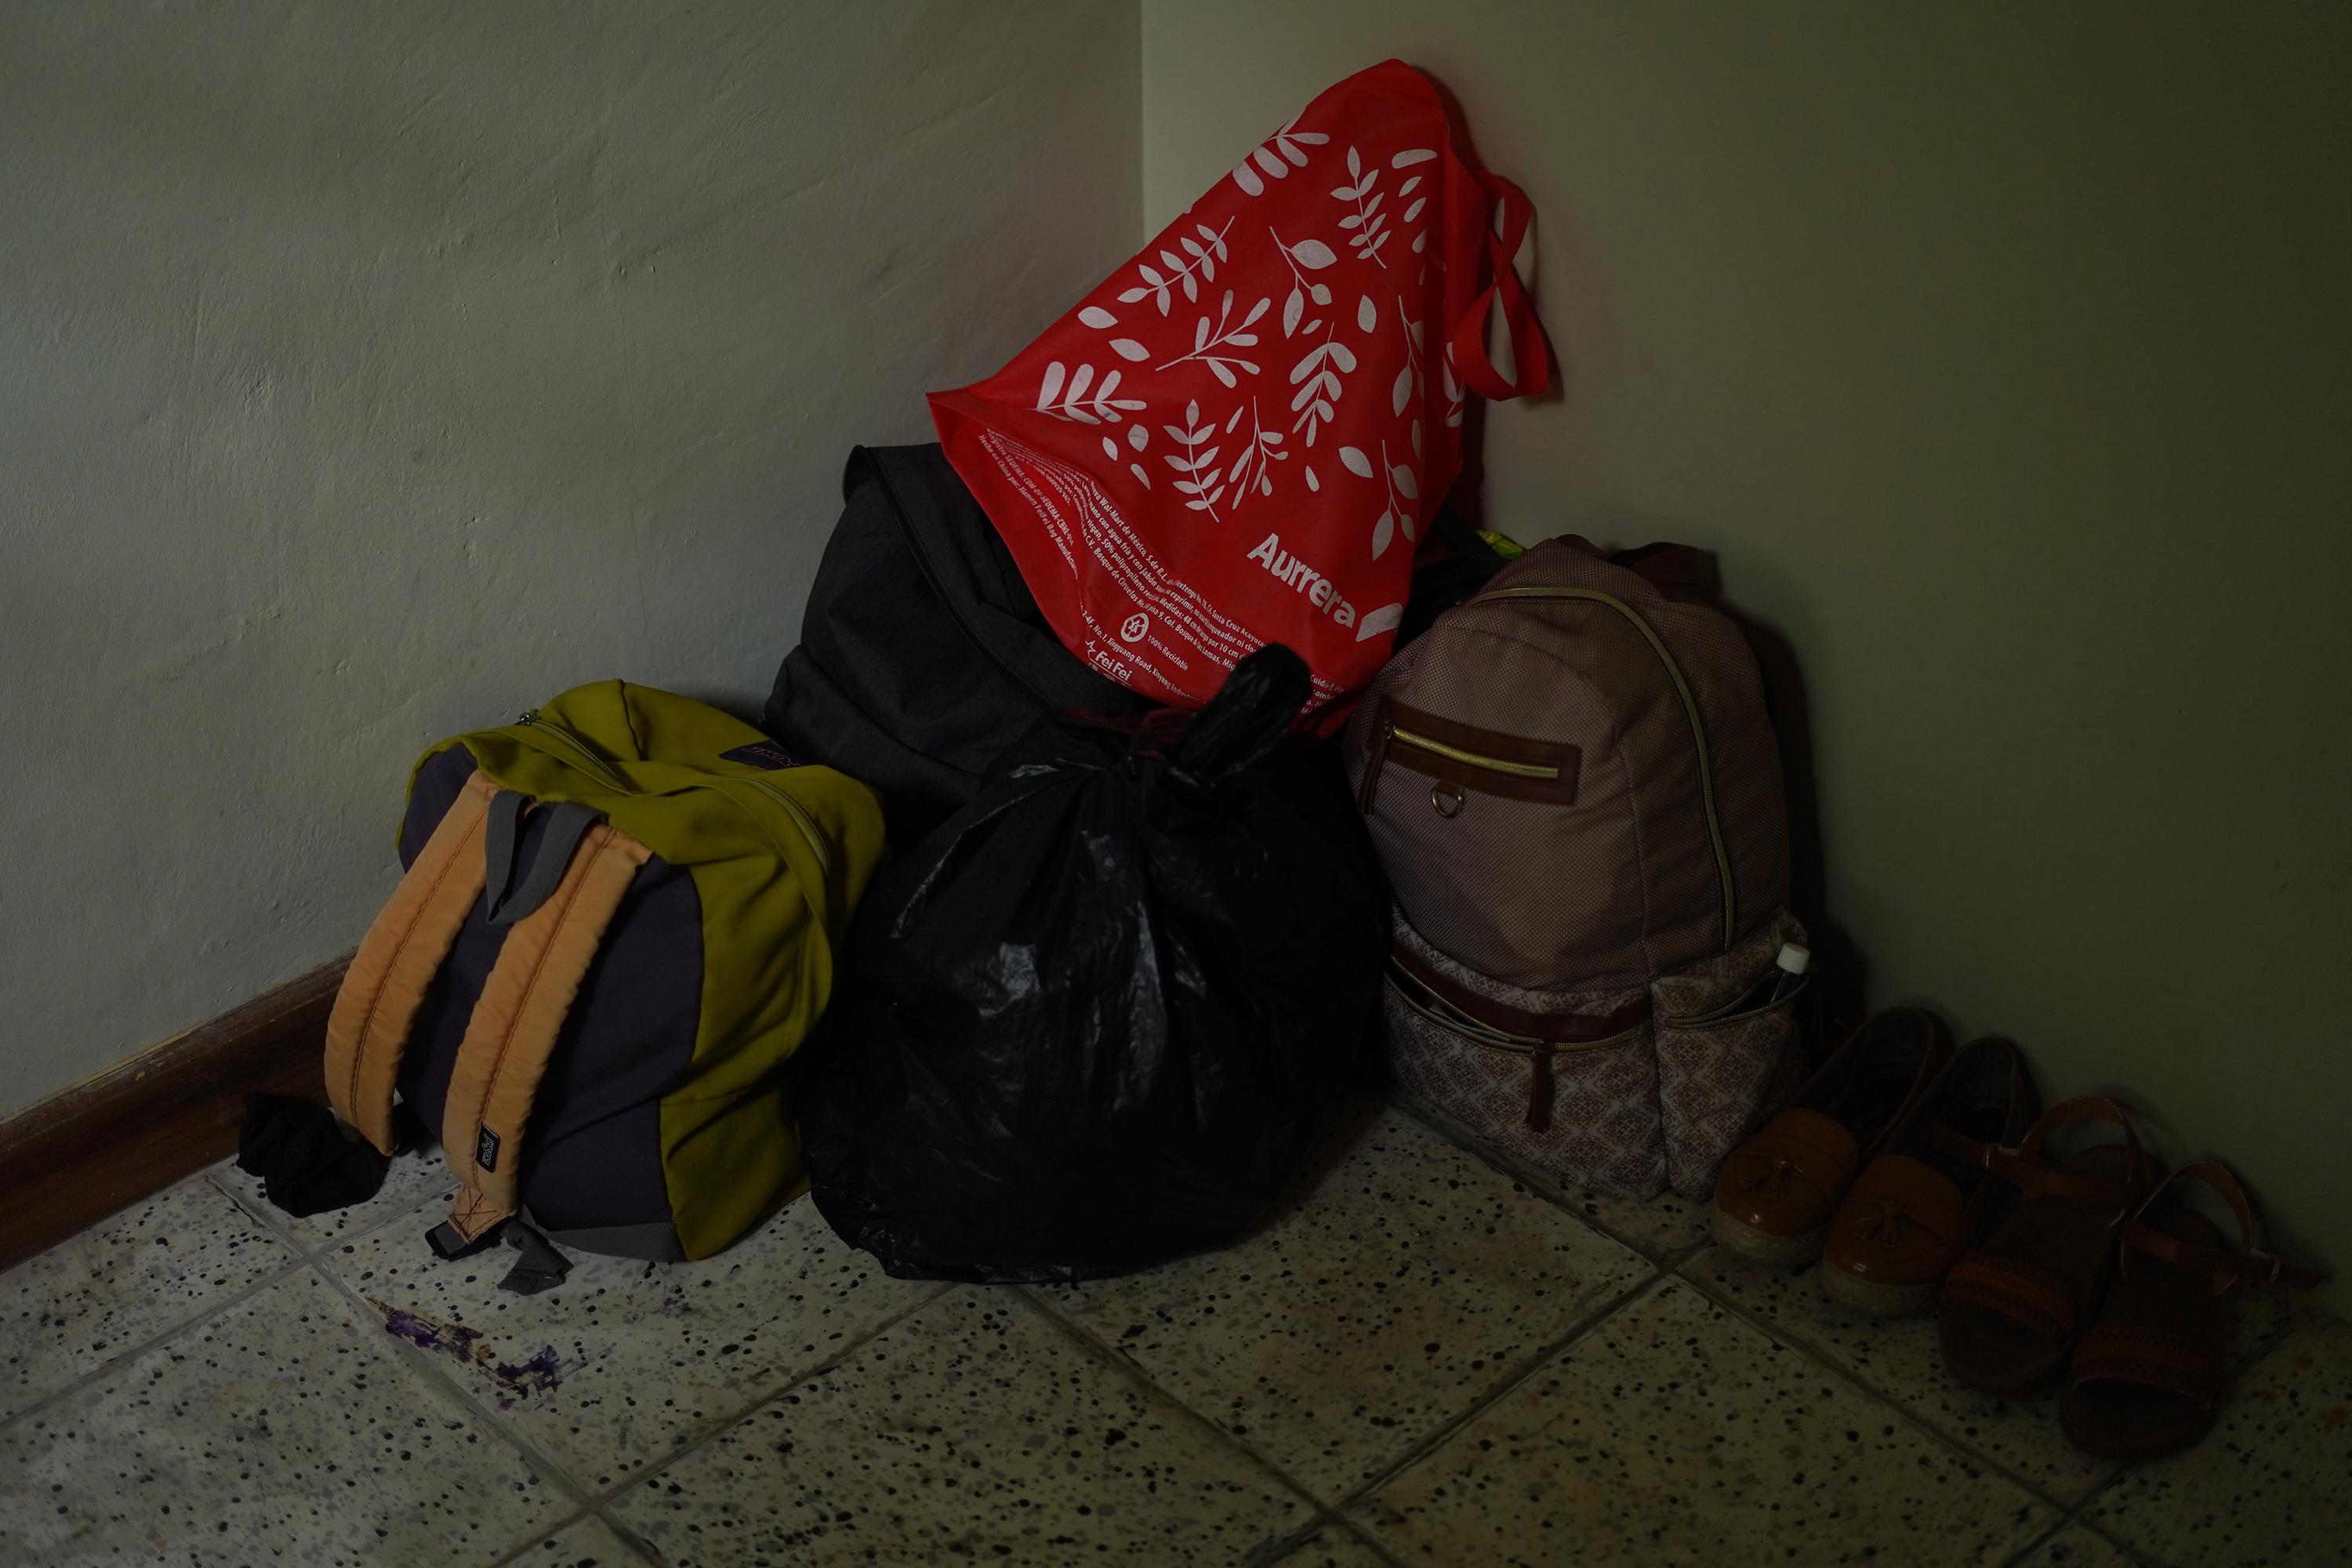 The family keeps their luggage organized, in case they have to leave in a hurry. Here, backpacks are arranged in the corner of a small room they share in a house. Photo: Víctor Peña/El Faro